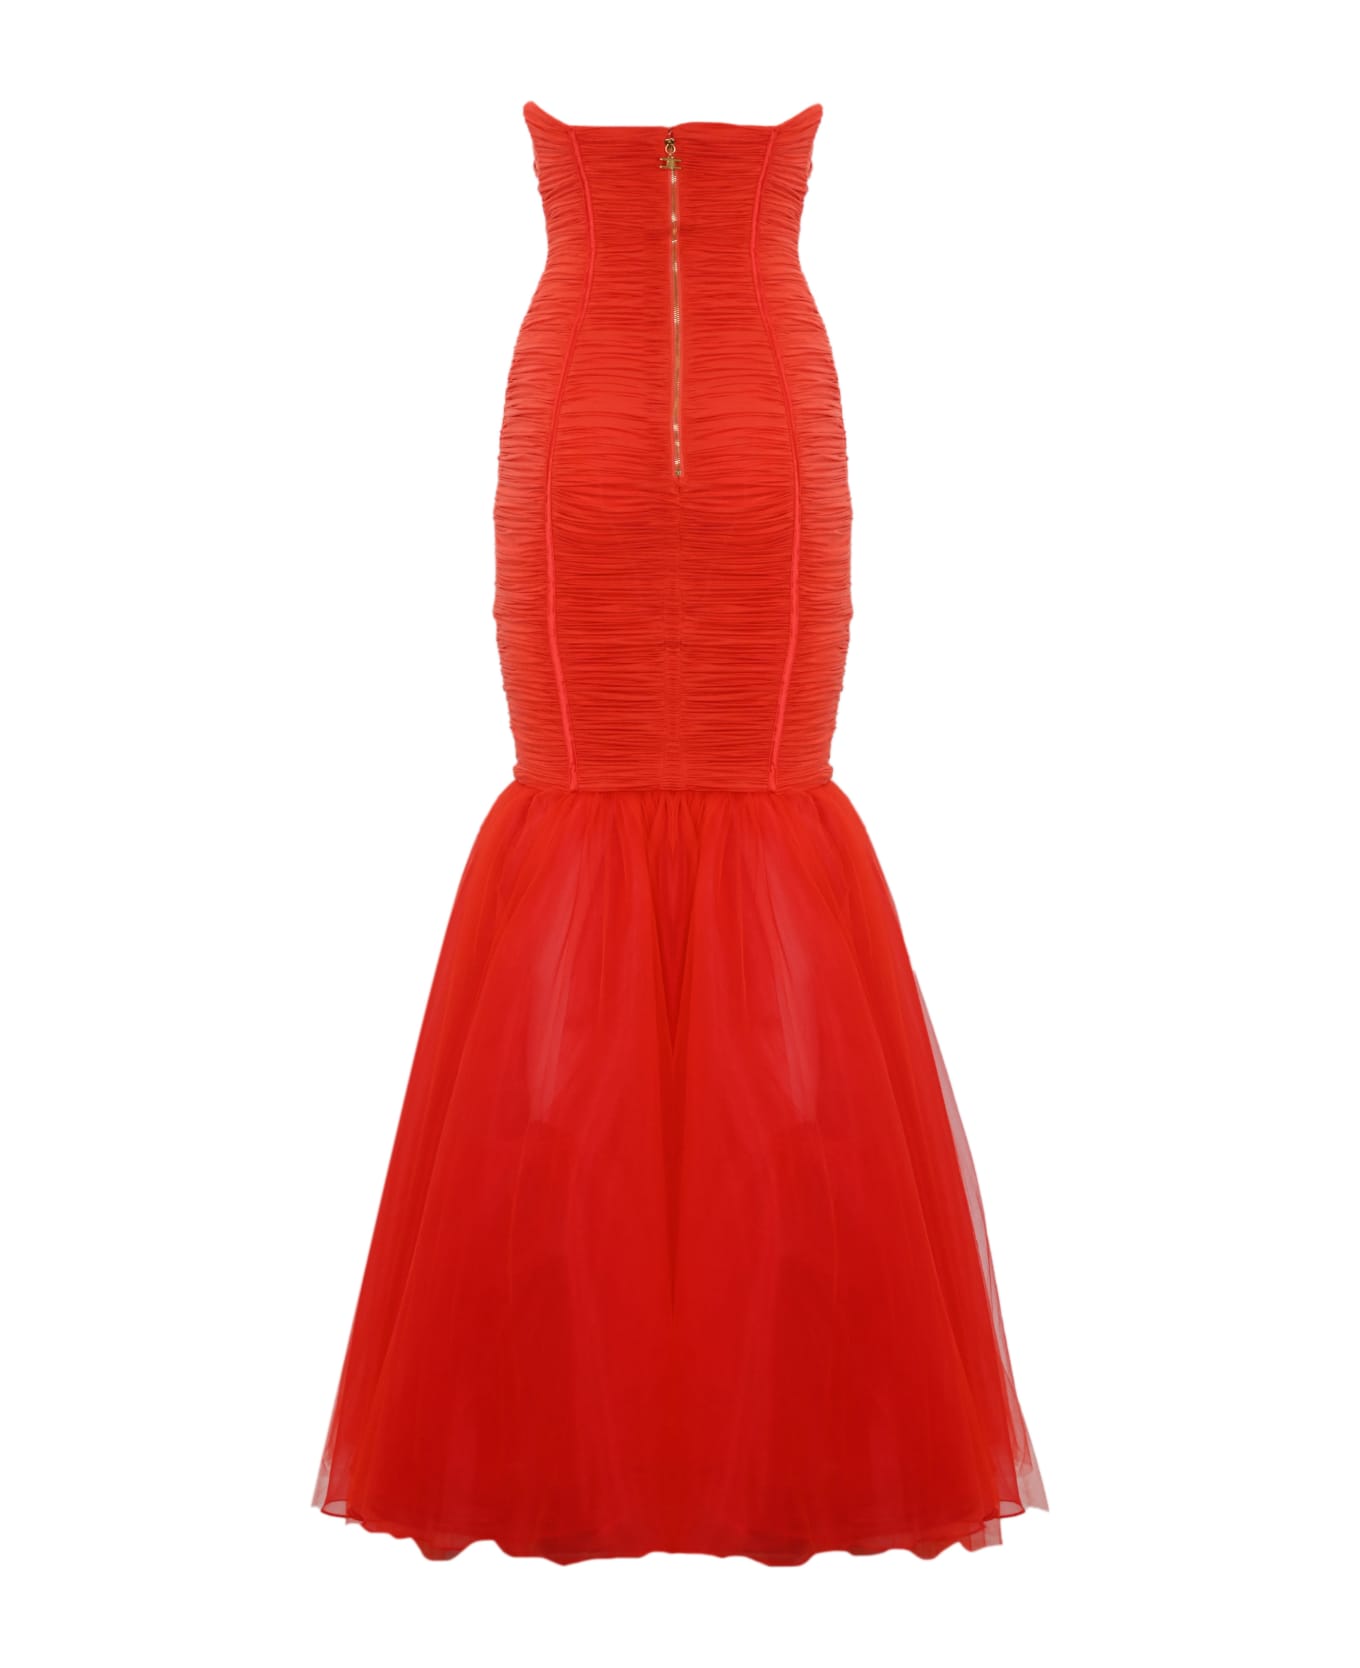 Elisabetta Franchi Red Carpet Dress In Jersey And Tulle - Corallo